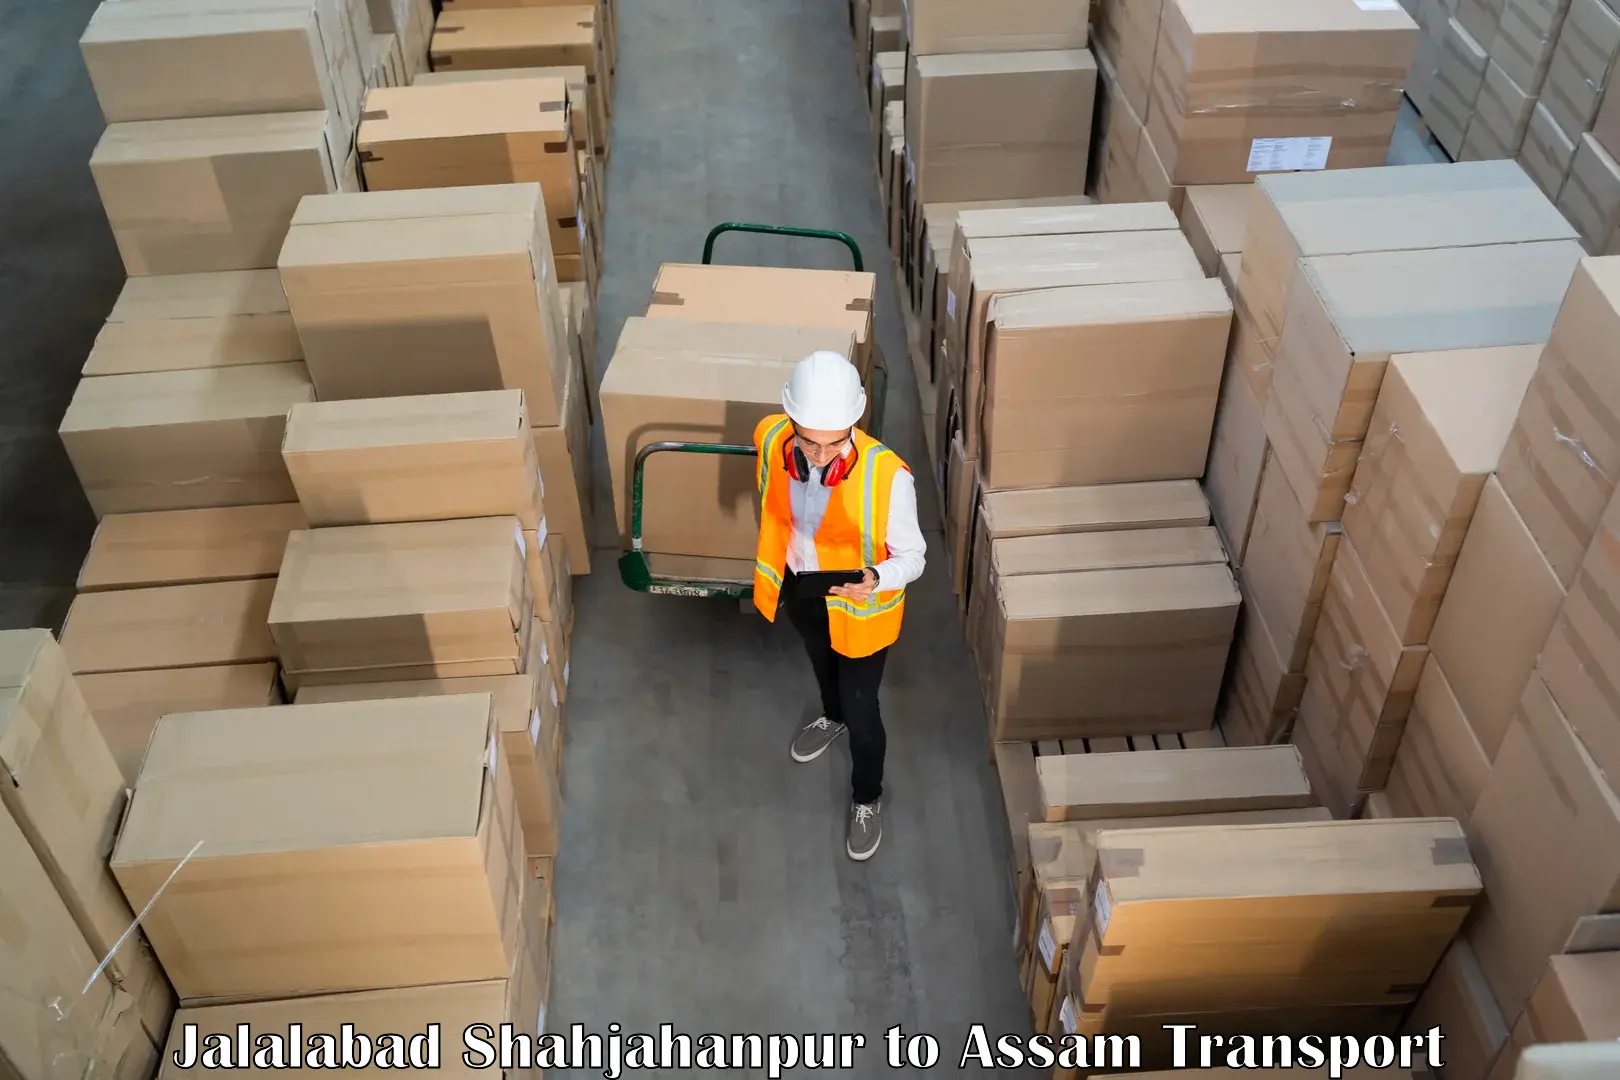 Vehicle transport services Jalalabad Shahjahanpur to Assam